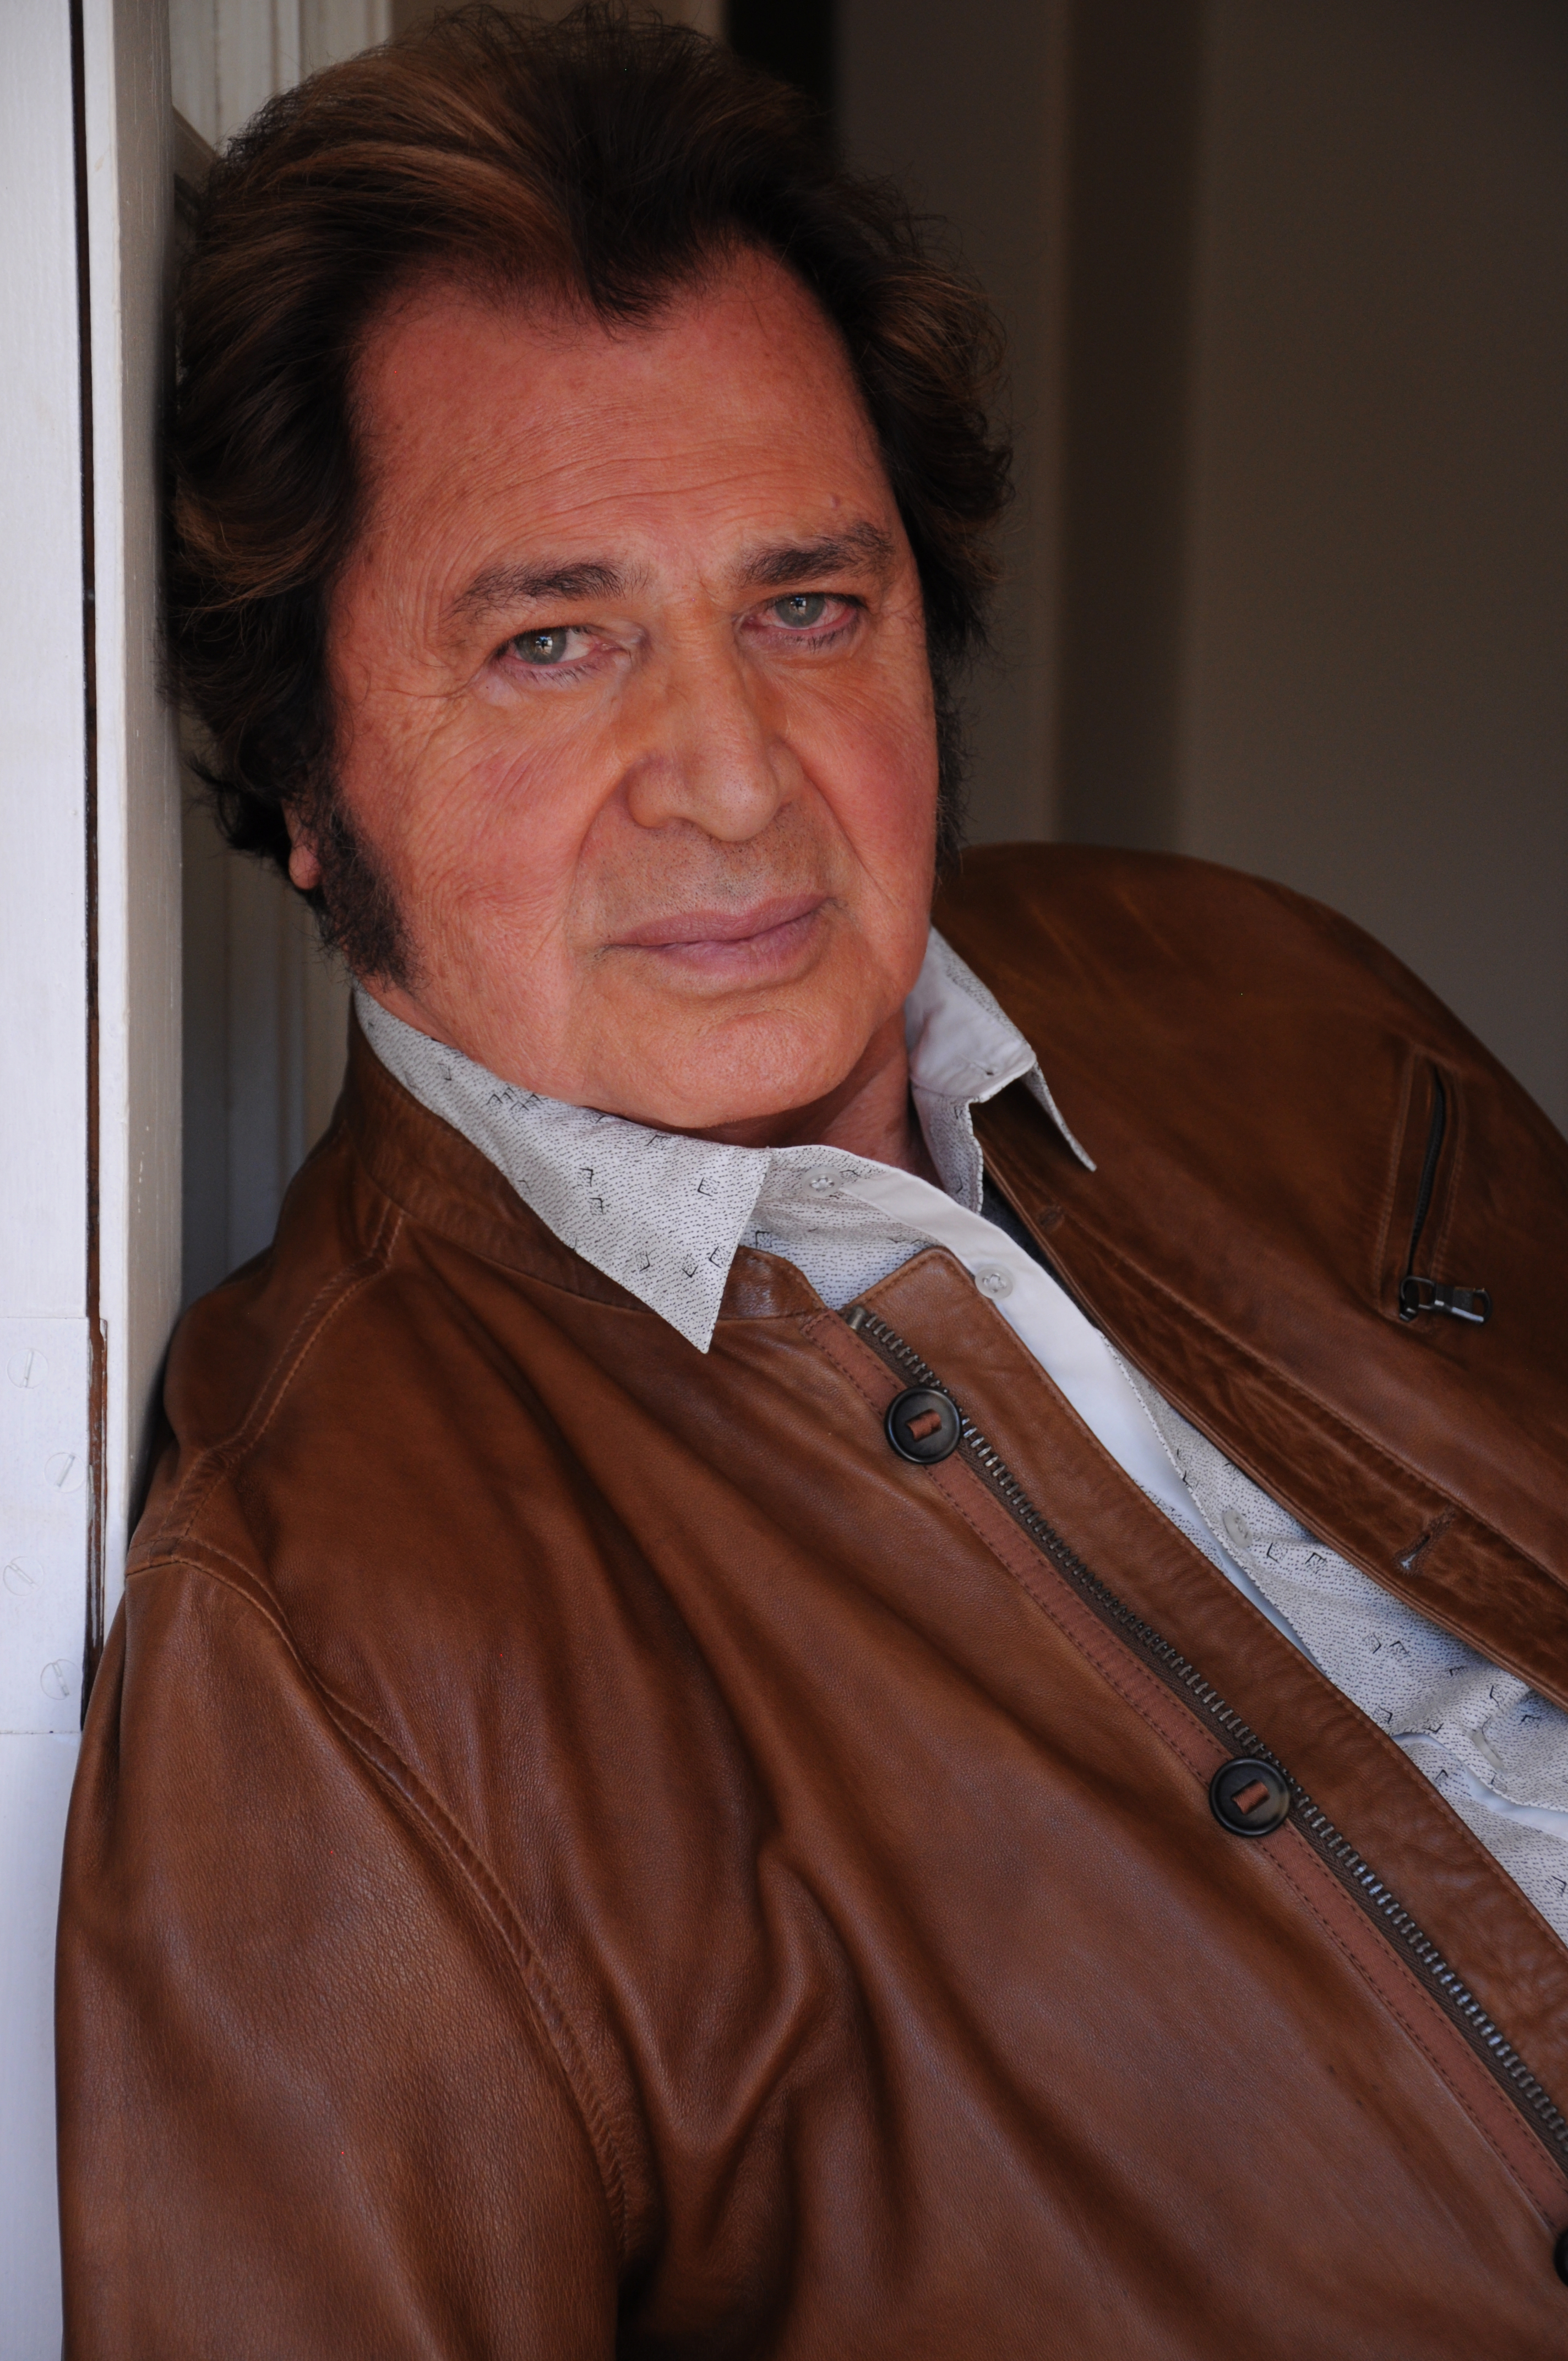 12 Days of Humperdinck – Day 4 “How Can You Live With Yourself”